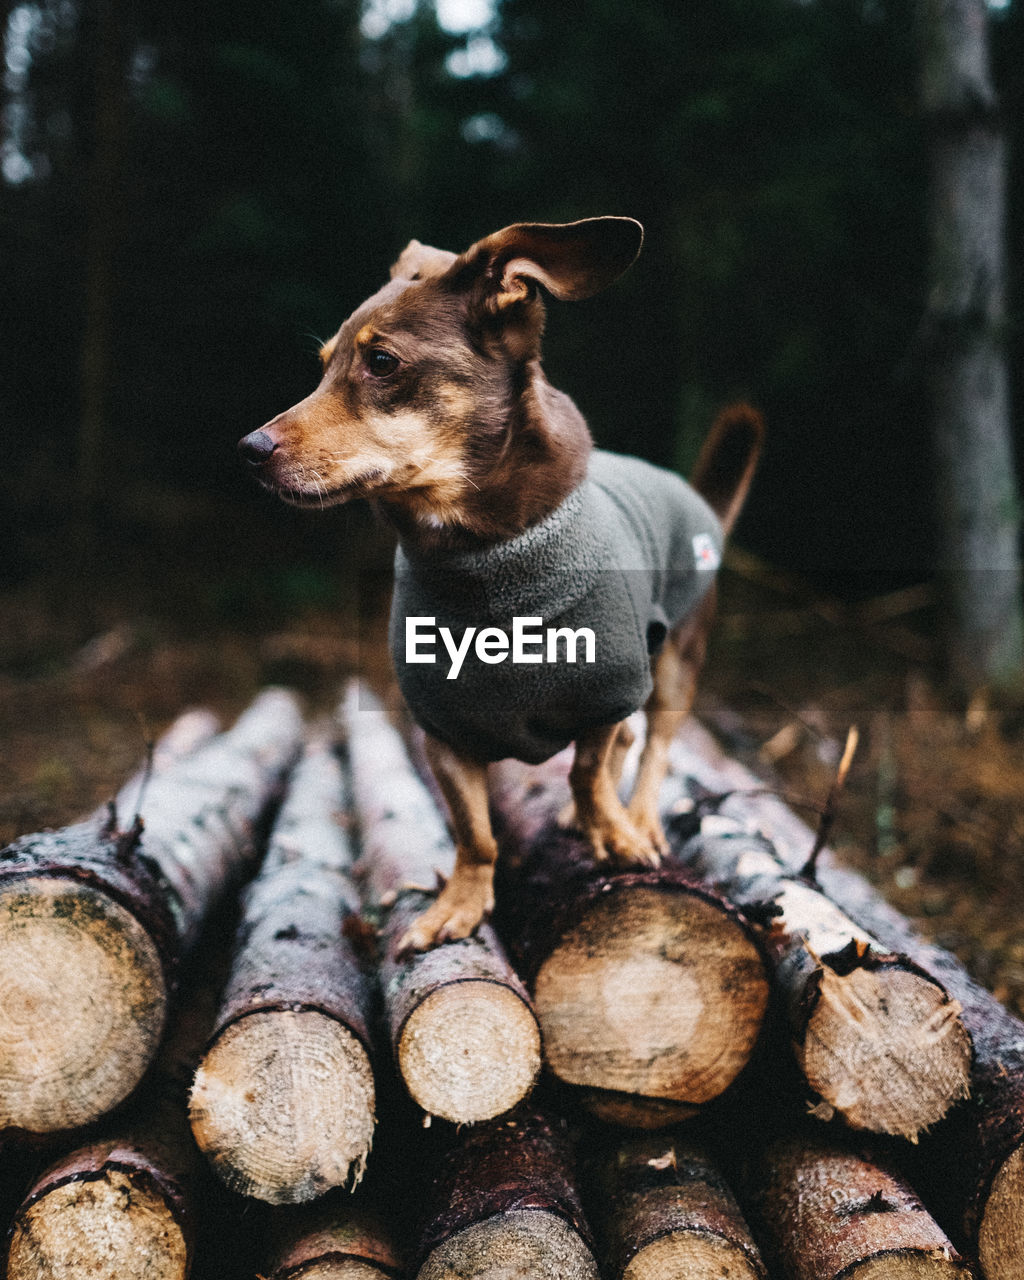 Dog looking away while standing on logs in forest